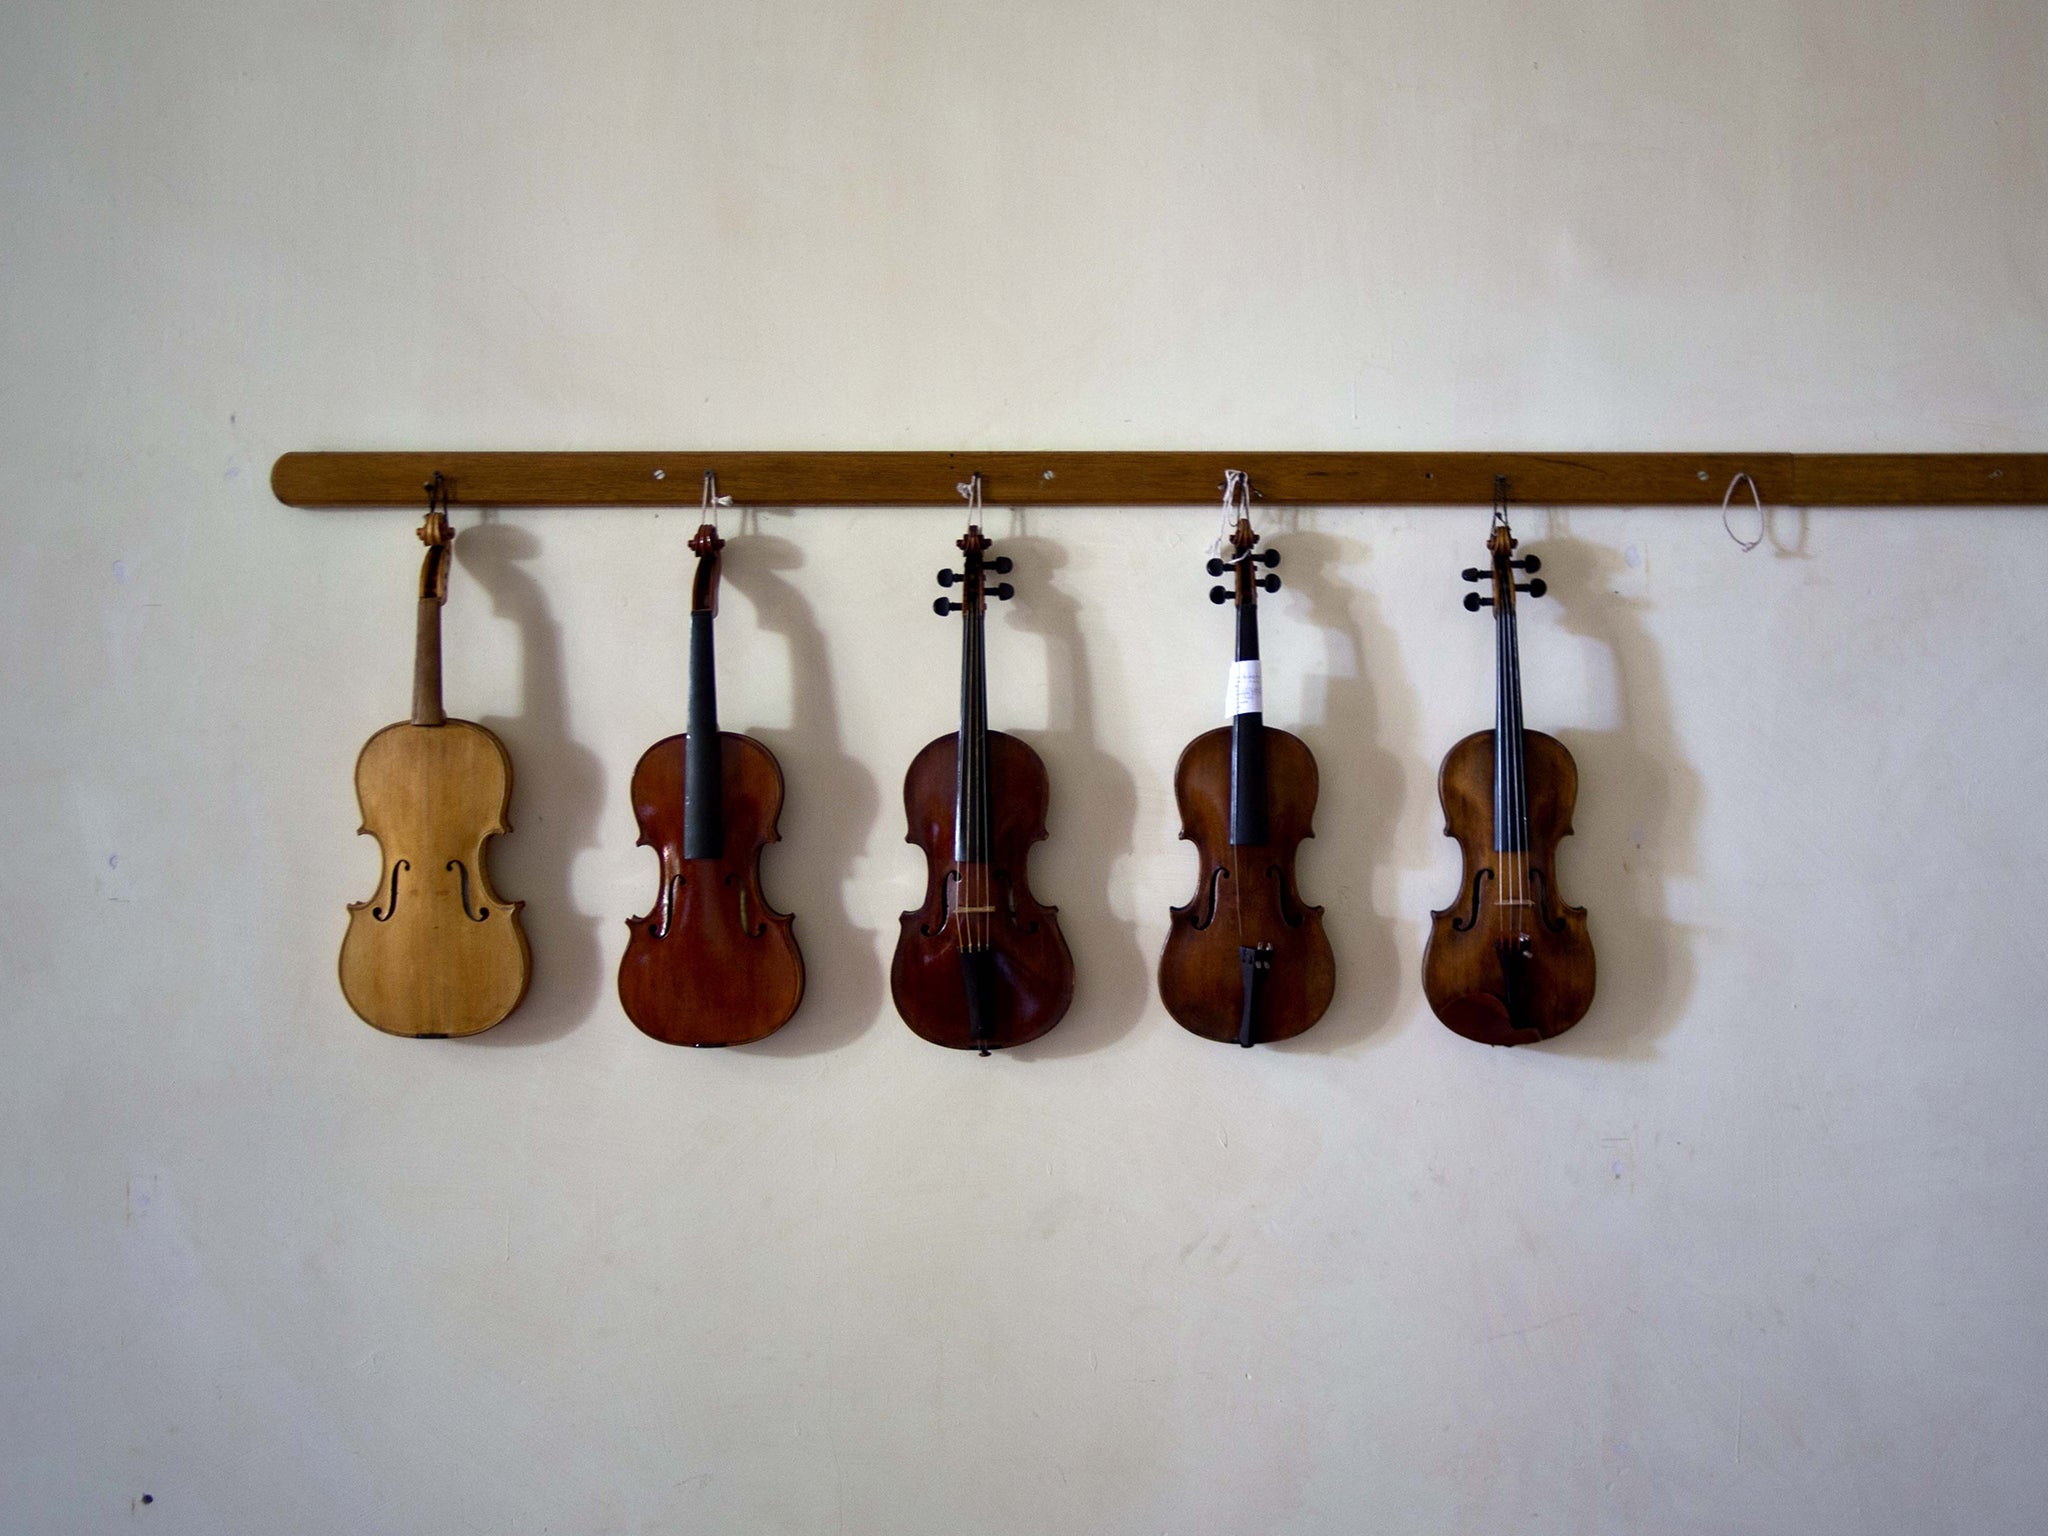 Damaged violins hang on the wall before being repaired at the Luthier Workshop of Havana